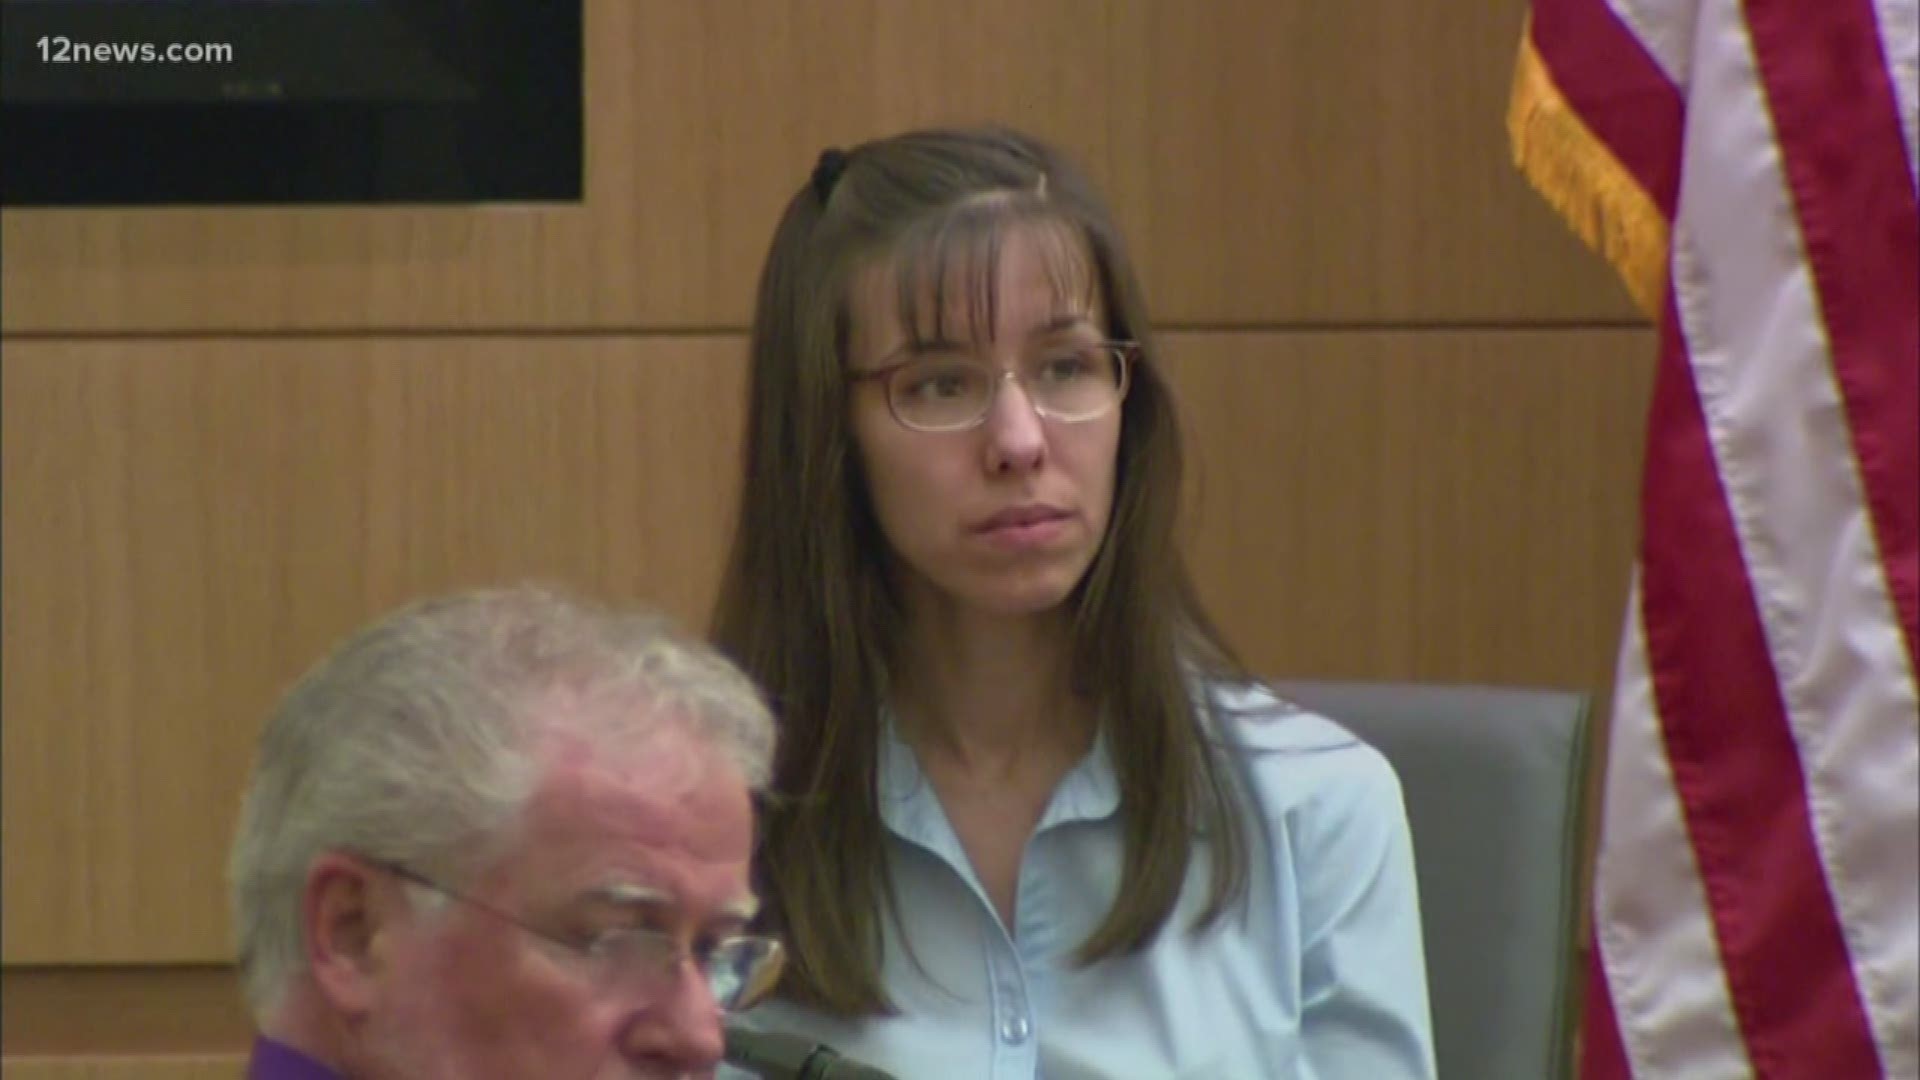 Jodi Arias is claiming that media coverage, among other factors, swayed the jury to convict her of killing her boyfriend, Travis Alexander.